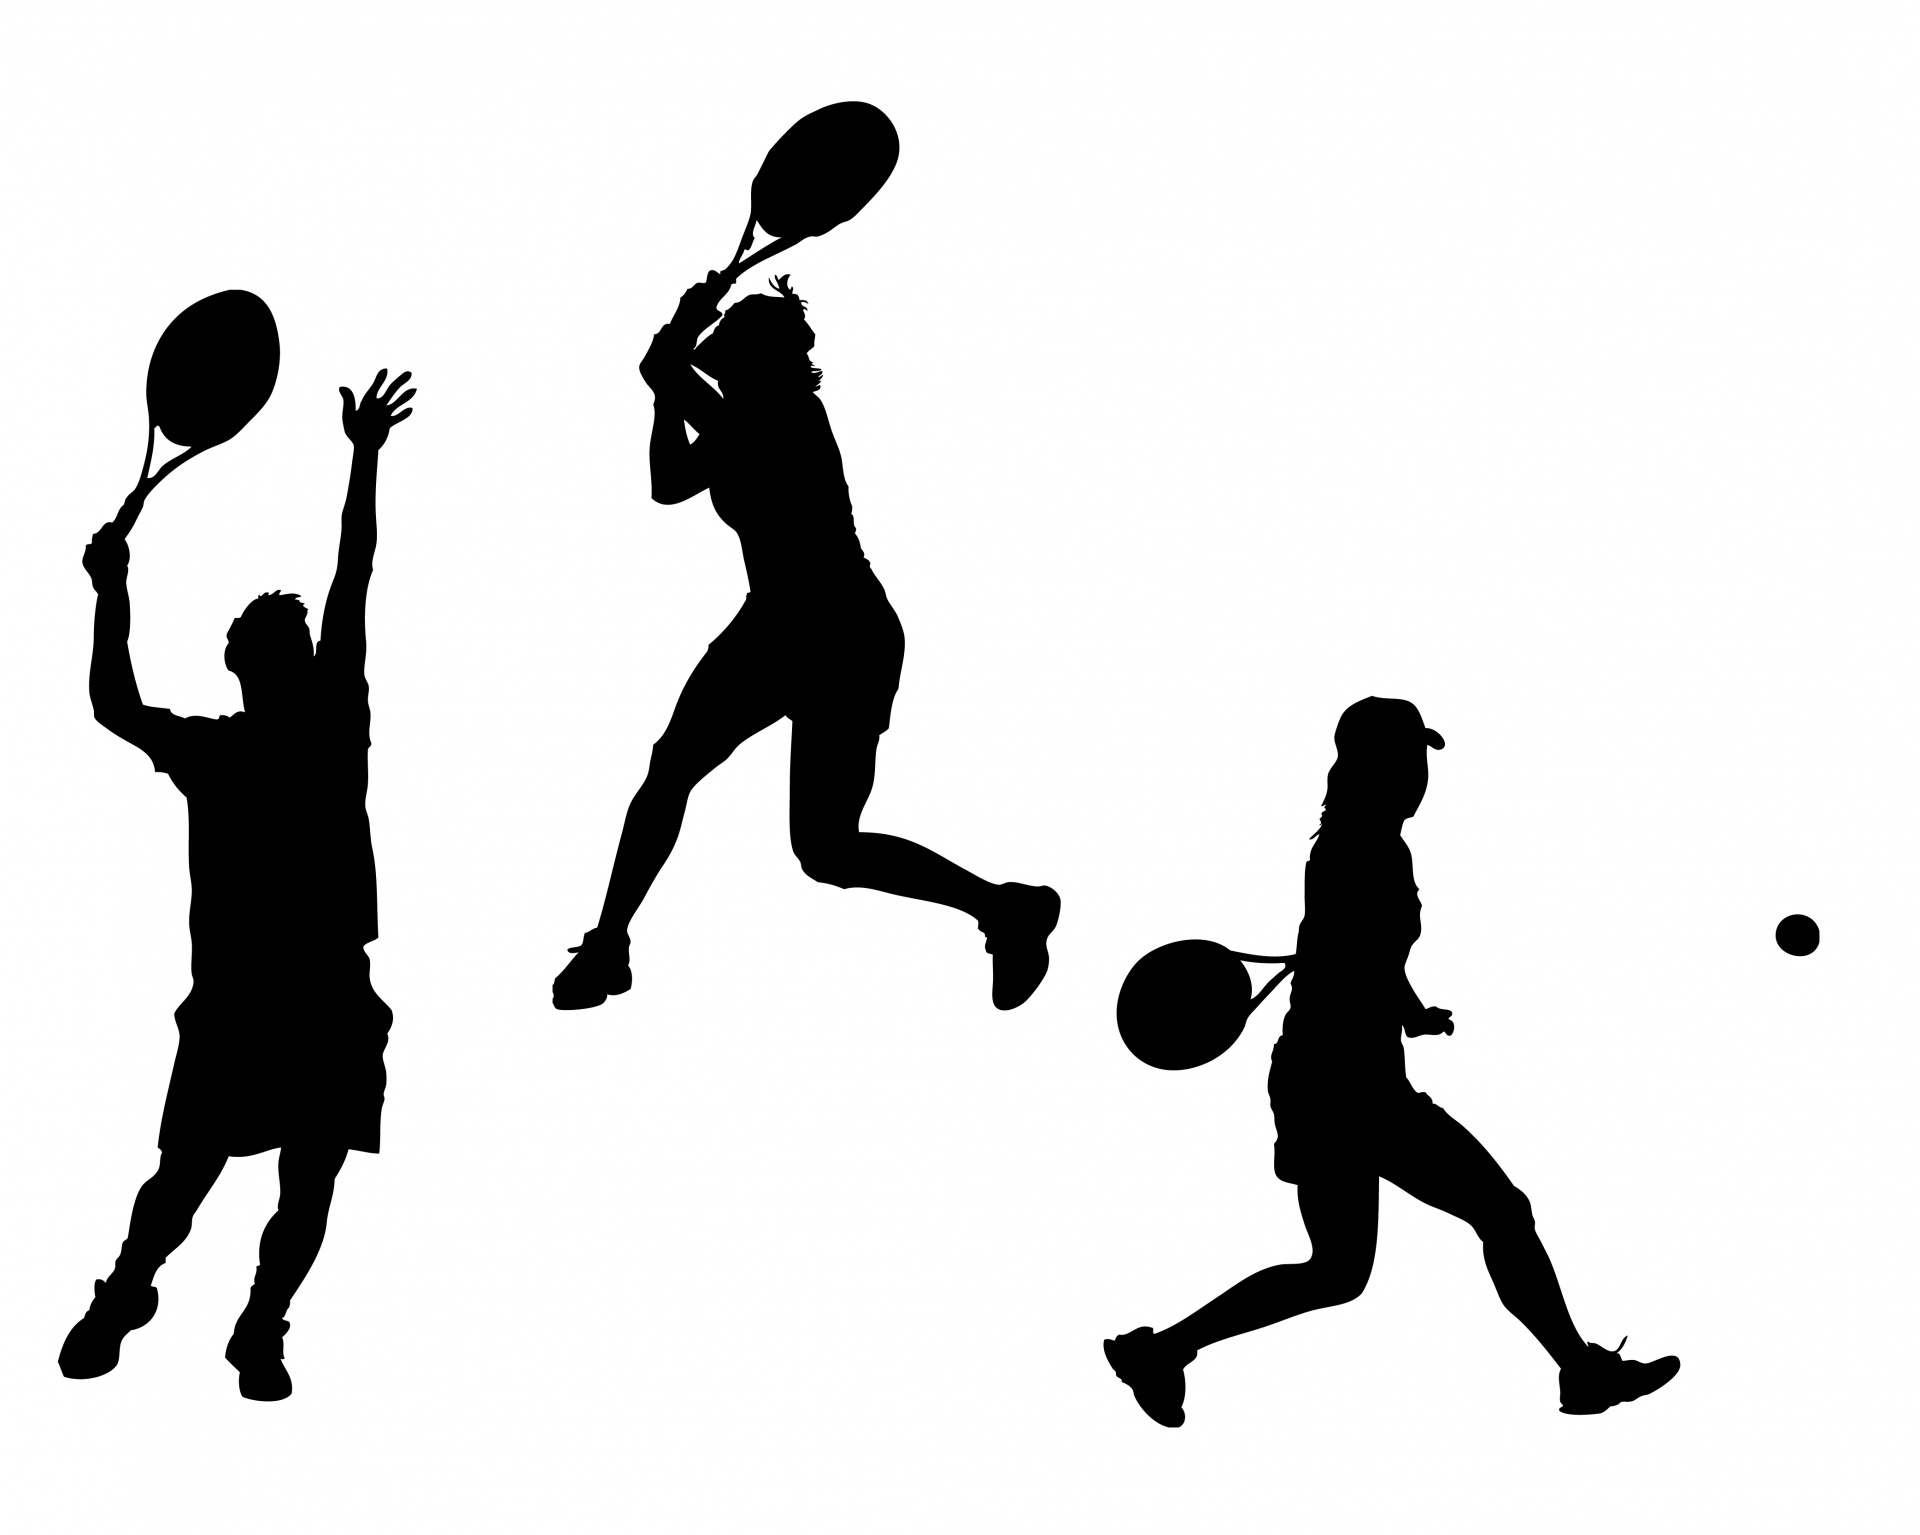 Tennis players black silhouettes on white background